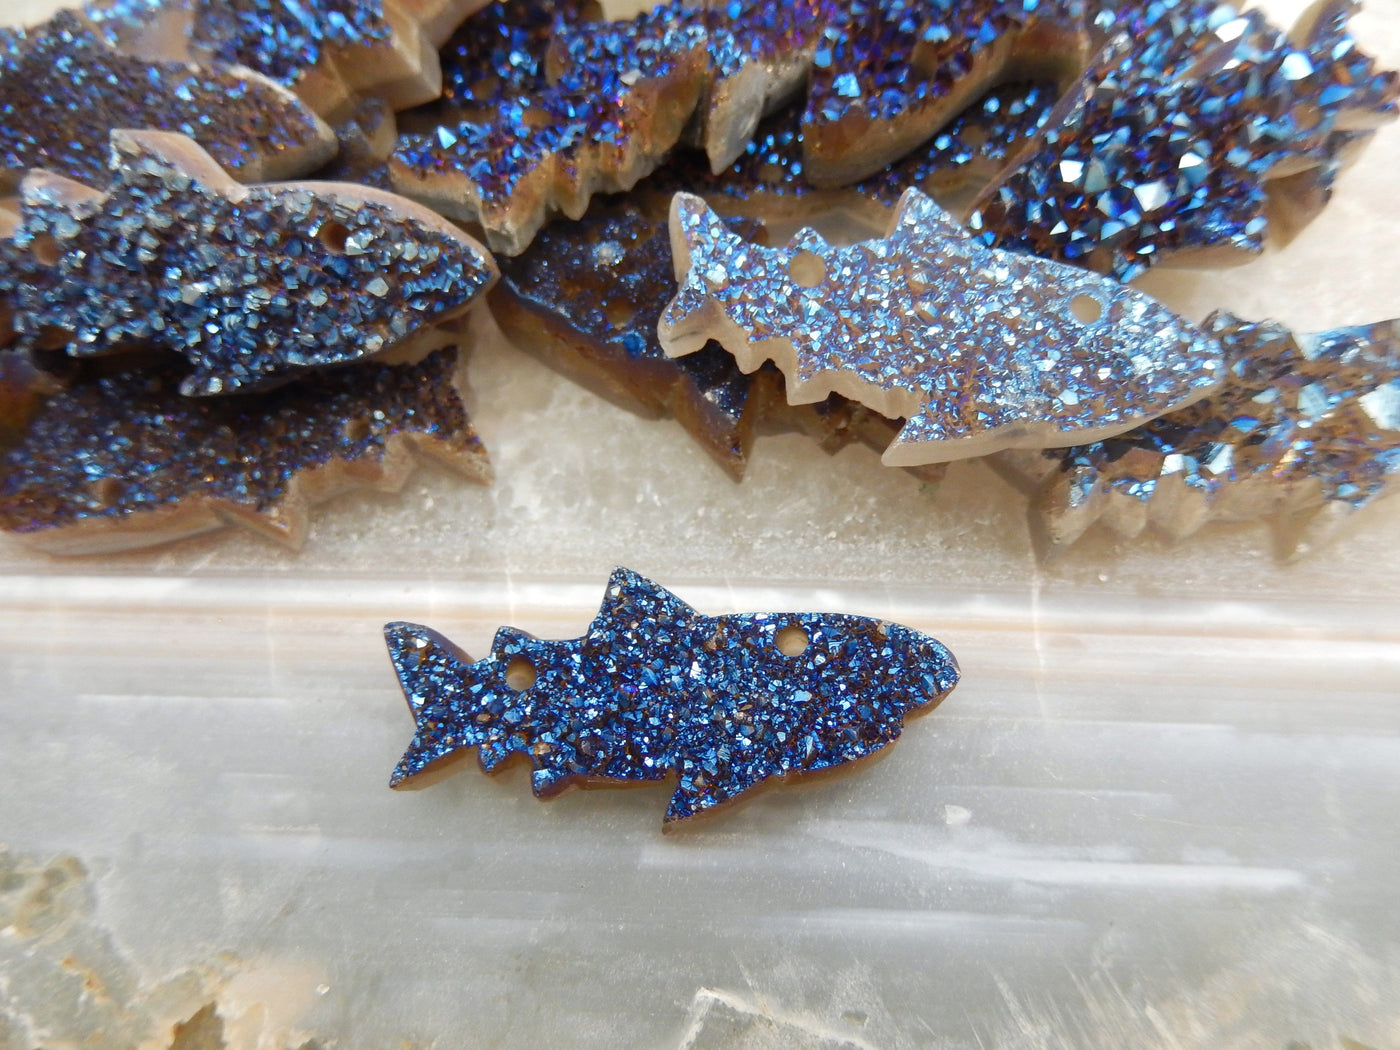 Mystic Blue Shark Fish Cluster Cabochon with others in the background